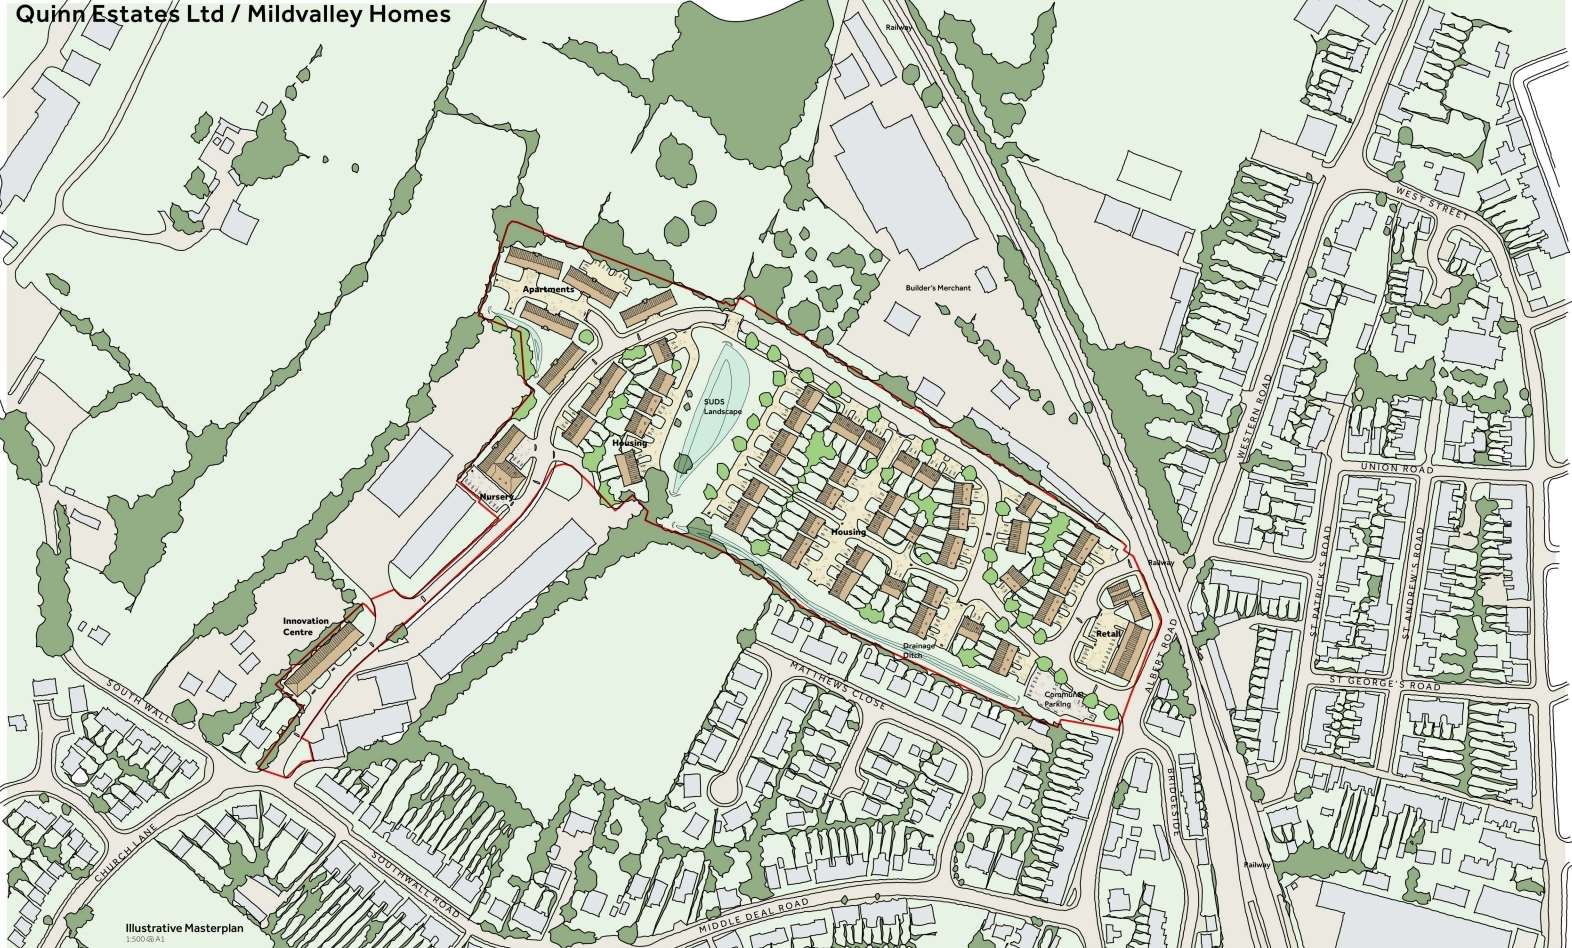 Quinn Estates is proposing to build 142 houses, a nursery, an innovation centre, a small shop and a link road between Albert Road and Southwall Road